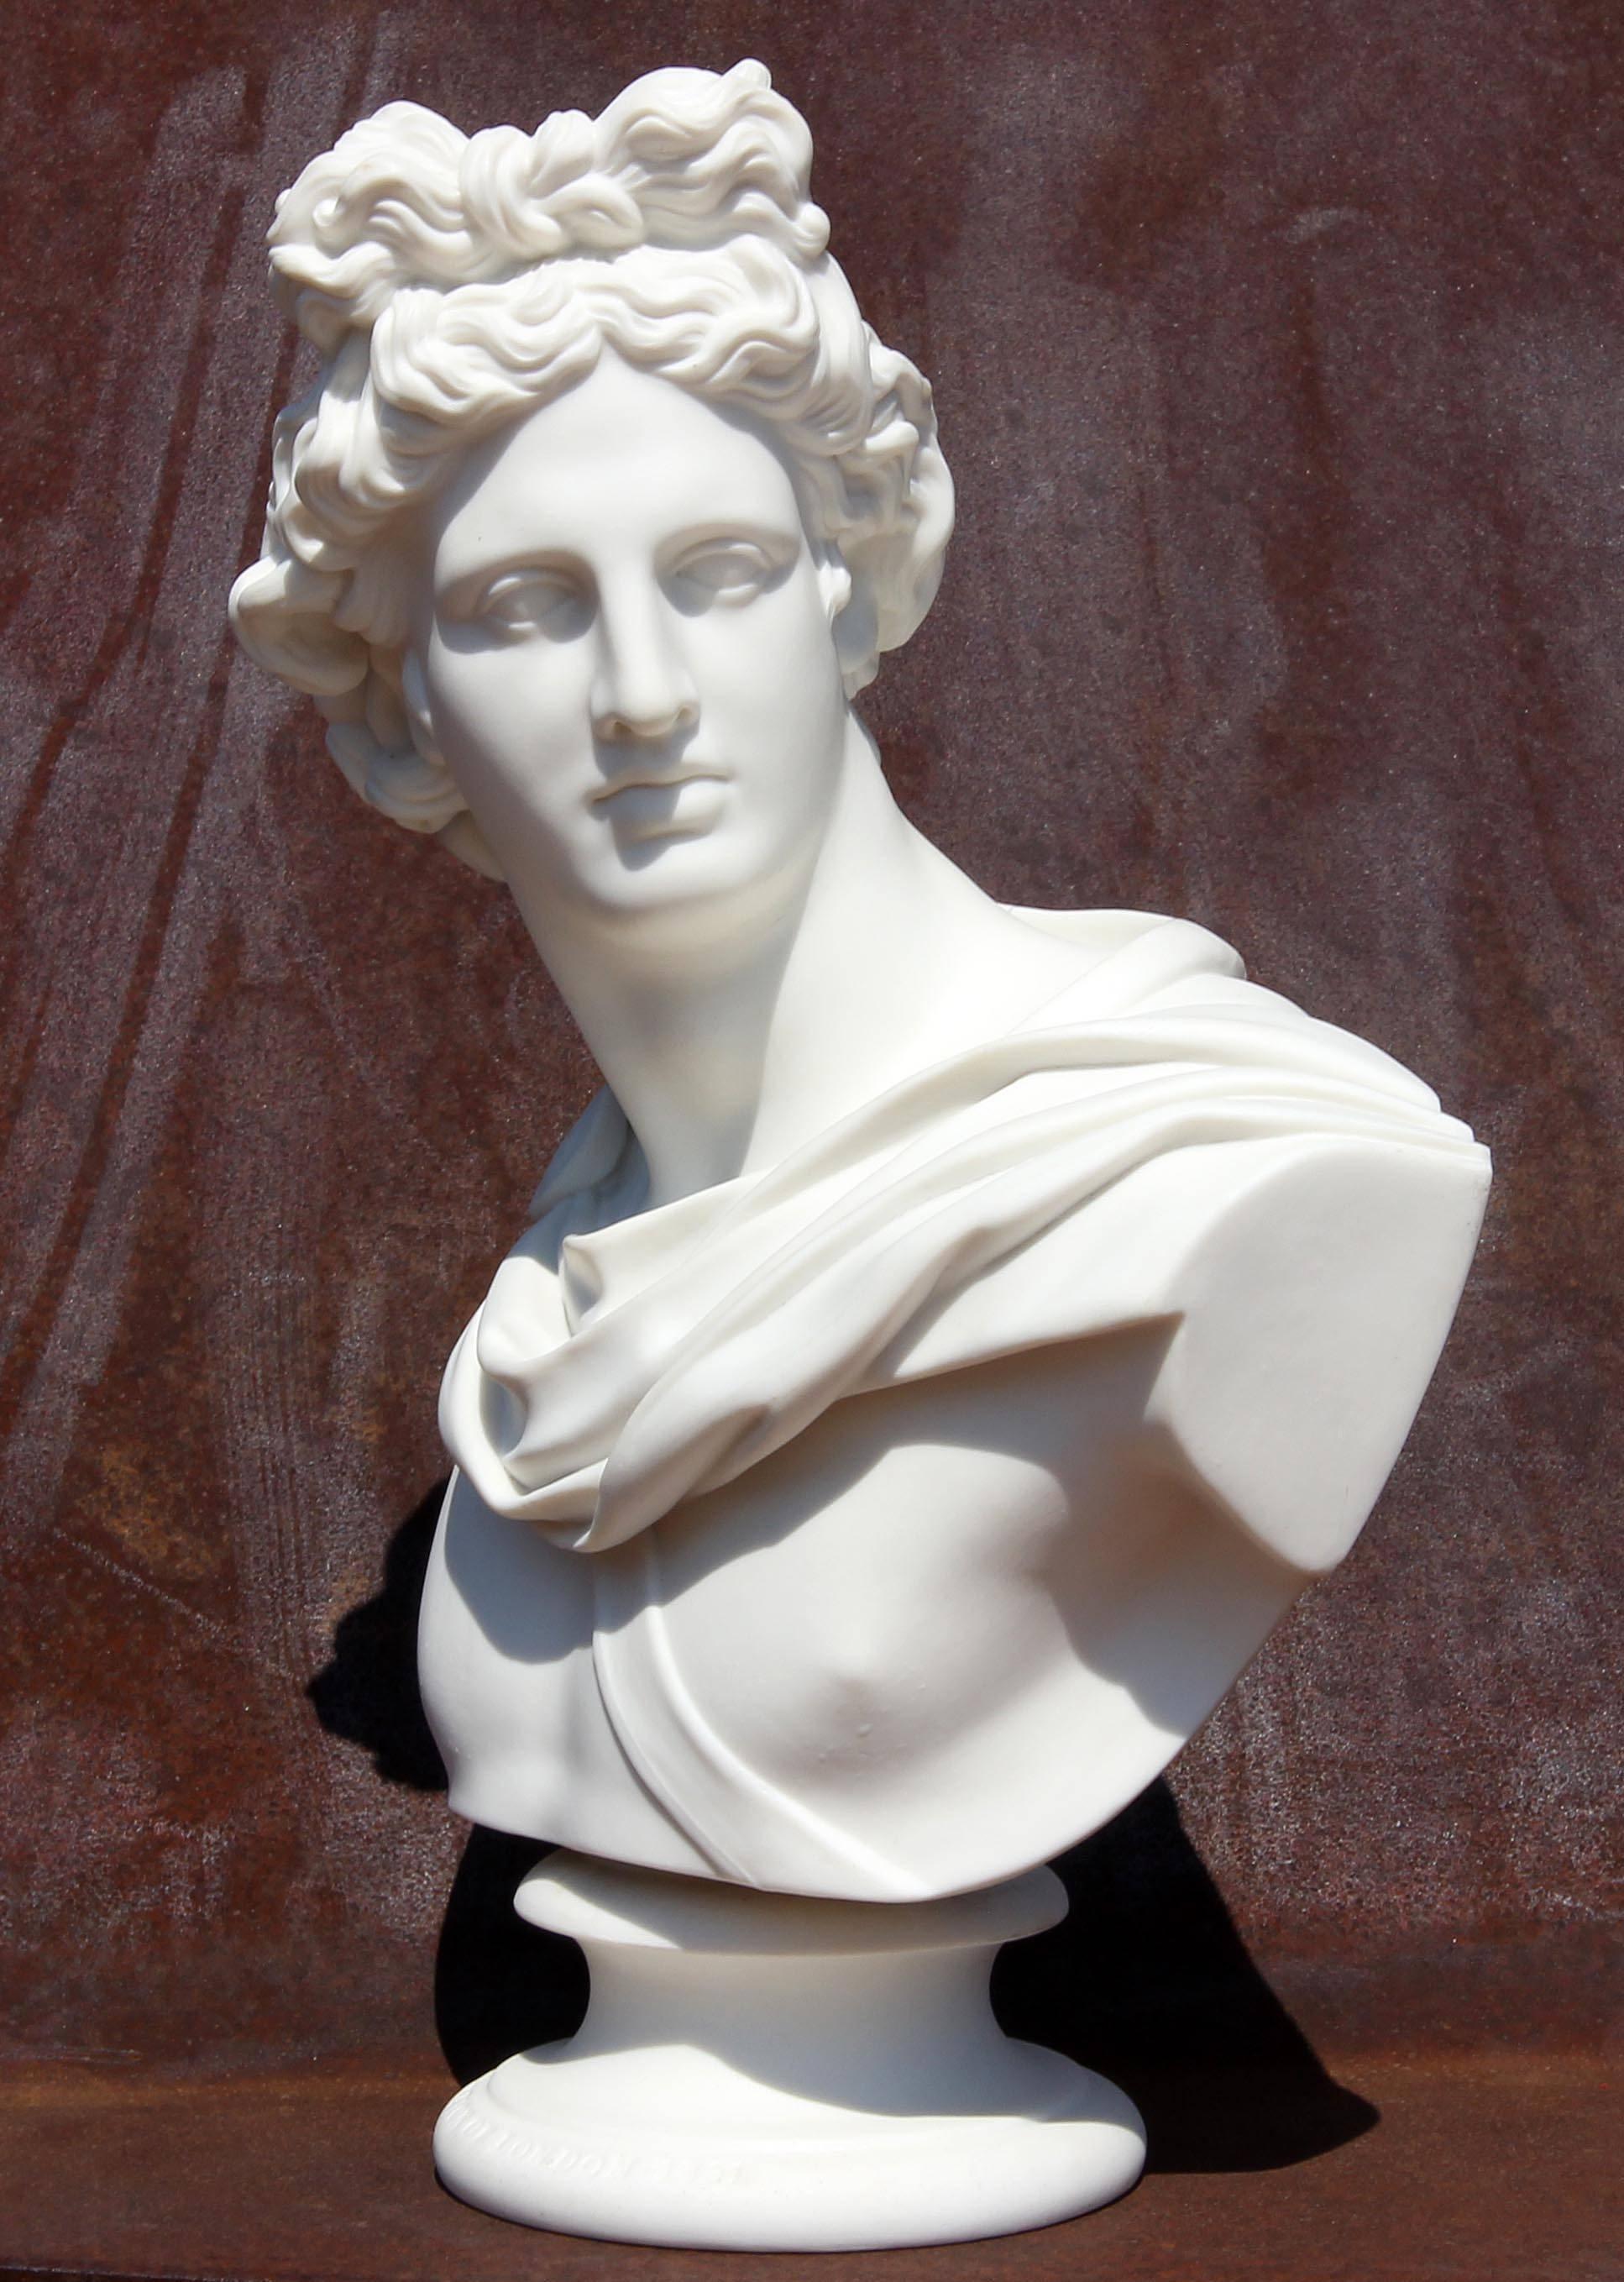 Parian sculpture of Apollo. Dated 1861. Produced by Art Union of London. Front of base is marked 